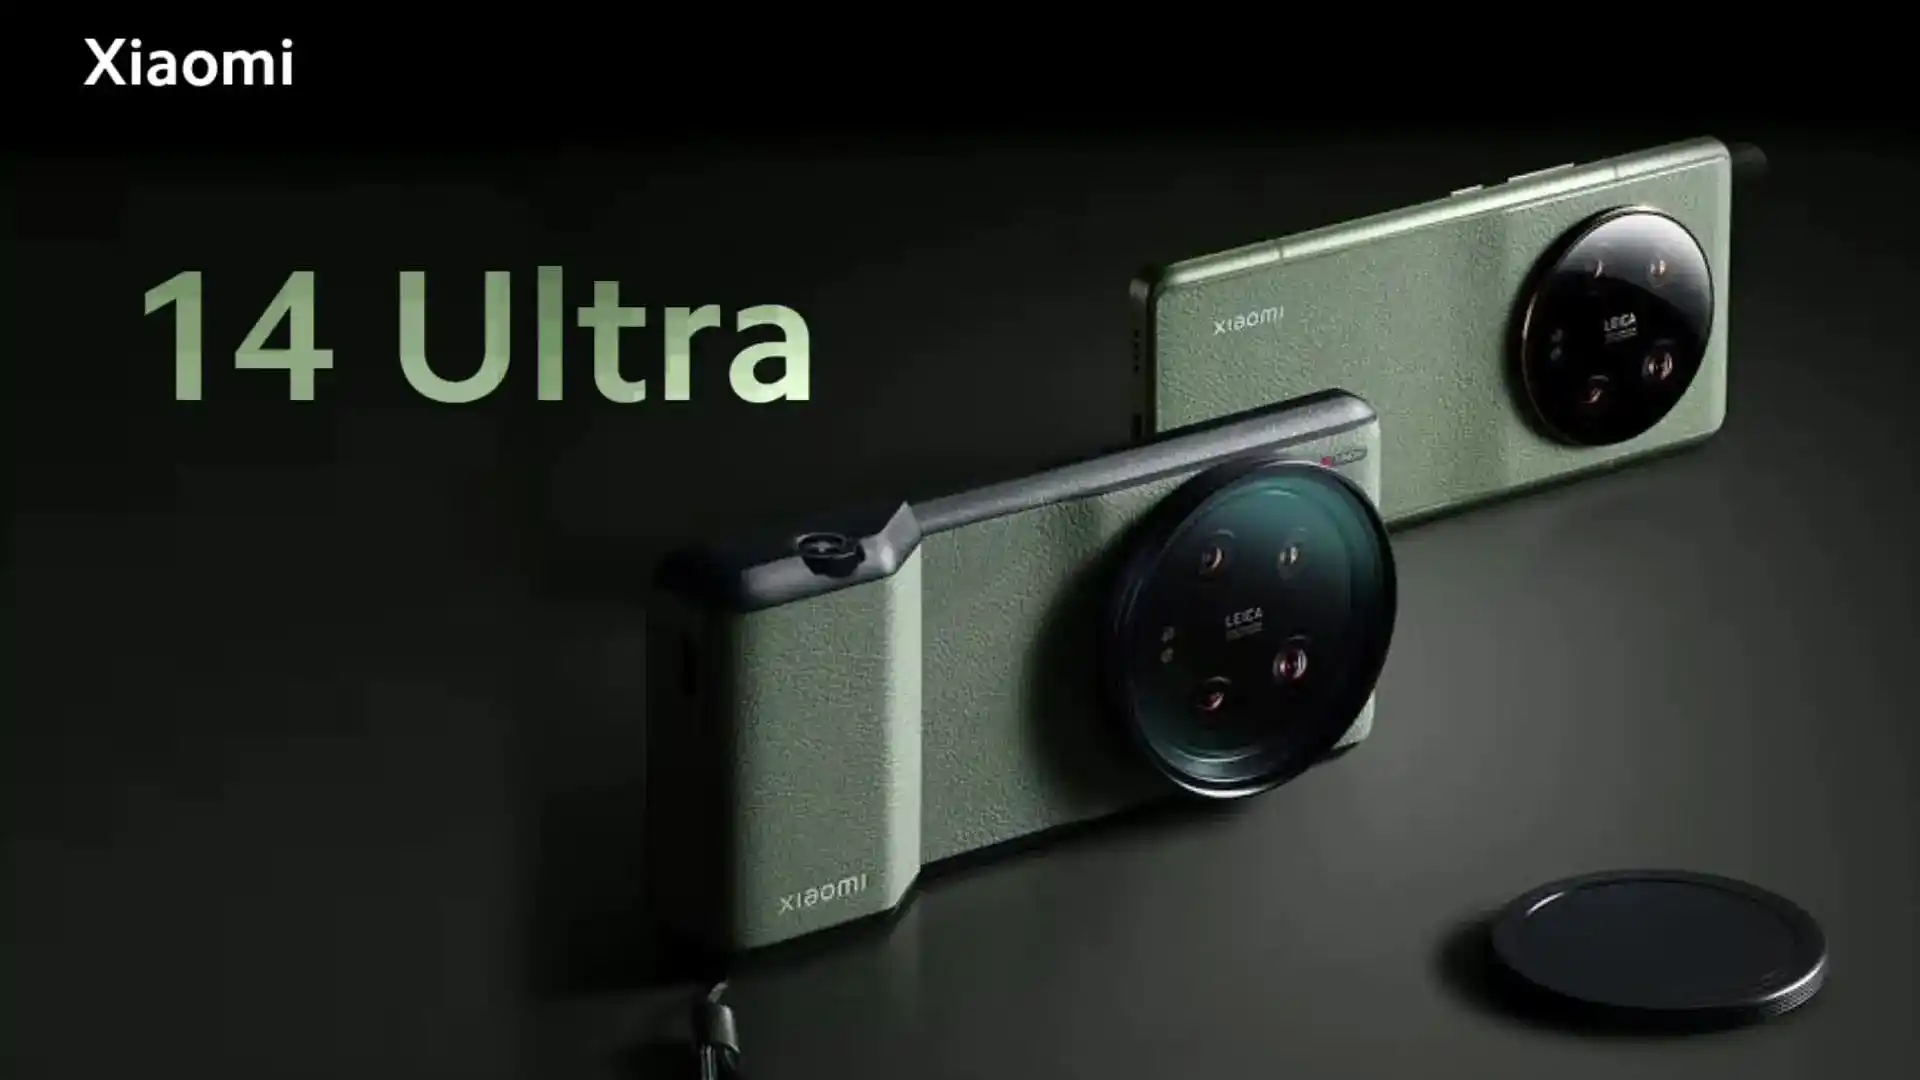 Xiaomi 14 Ultra Camera Kit Secures 3c Certification With Charging Details Unveiled Mobile Clusters 4999